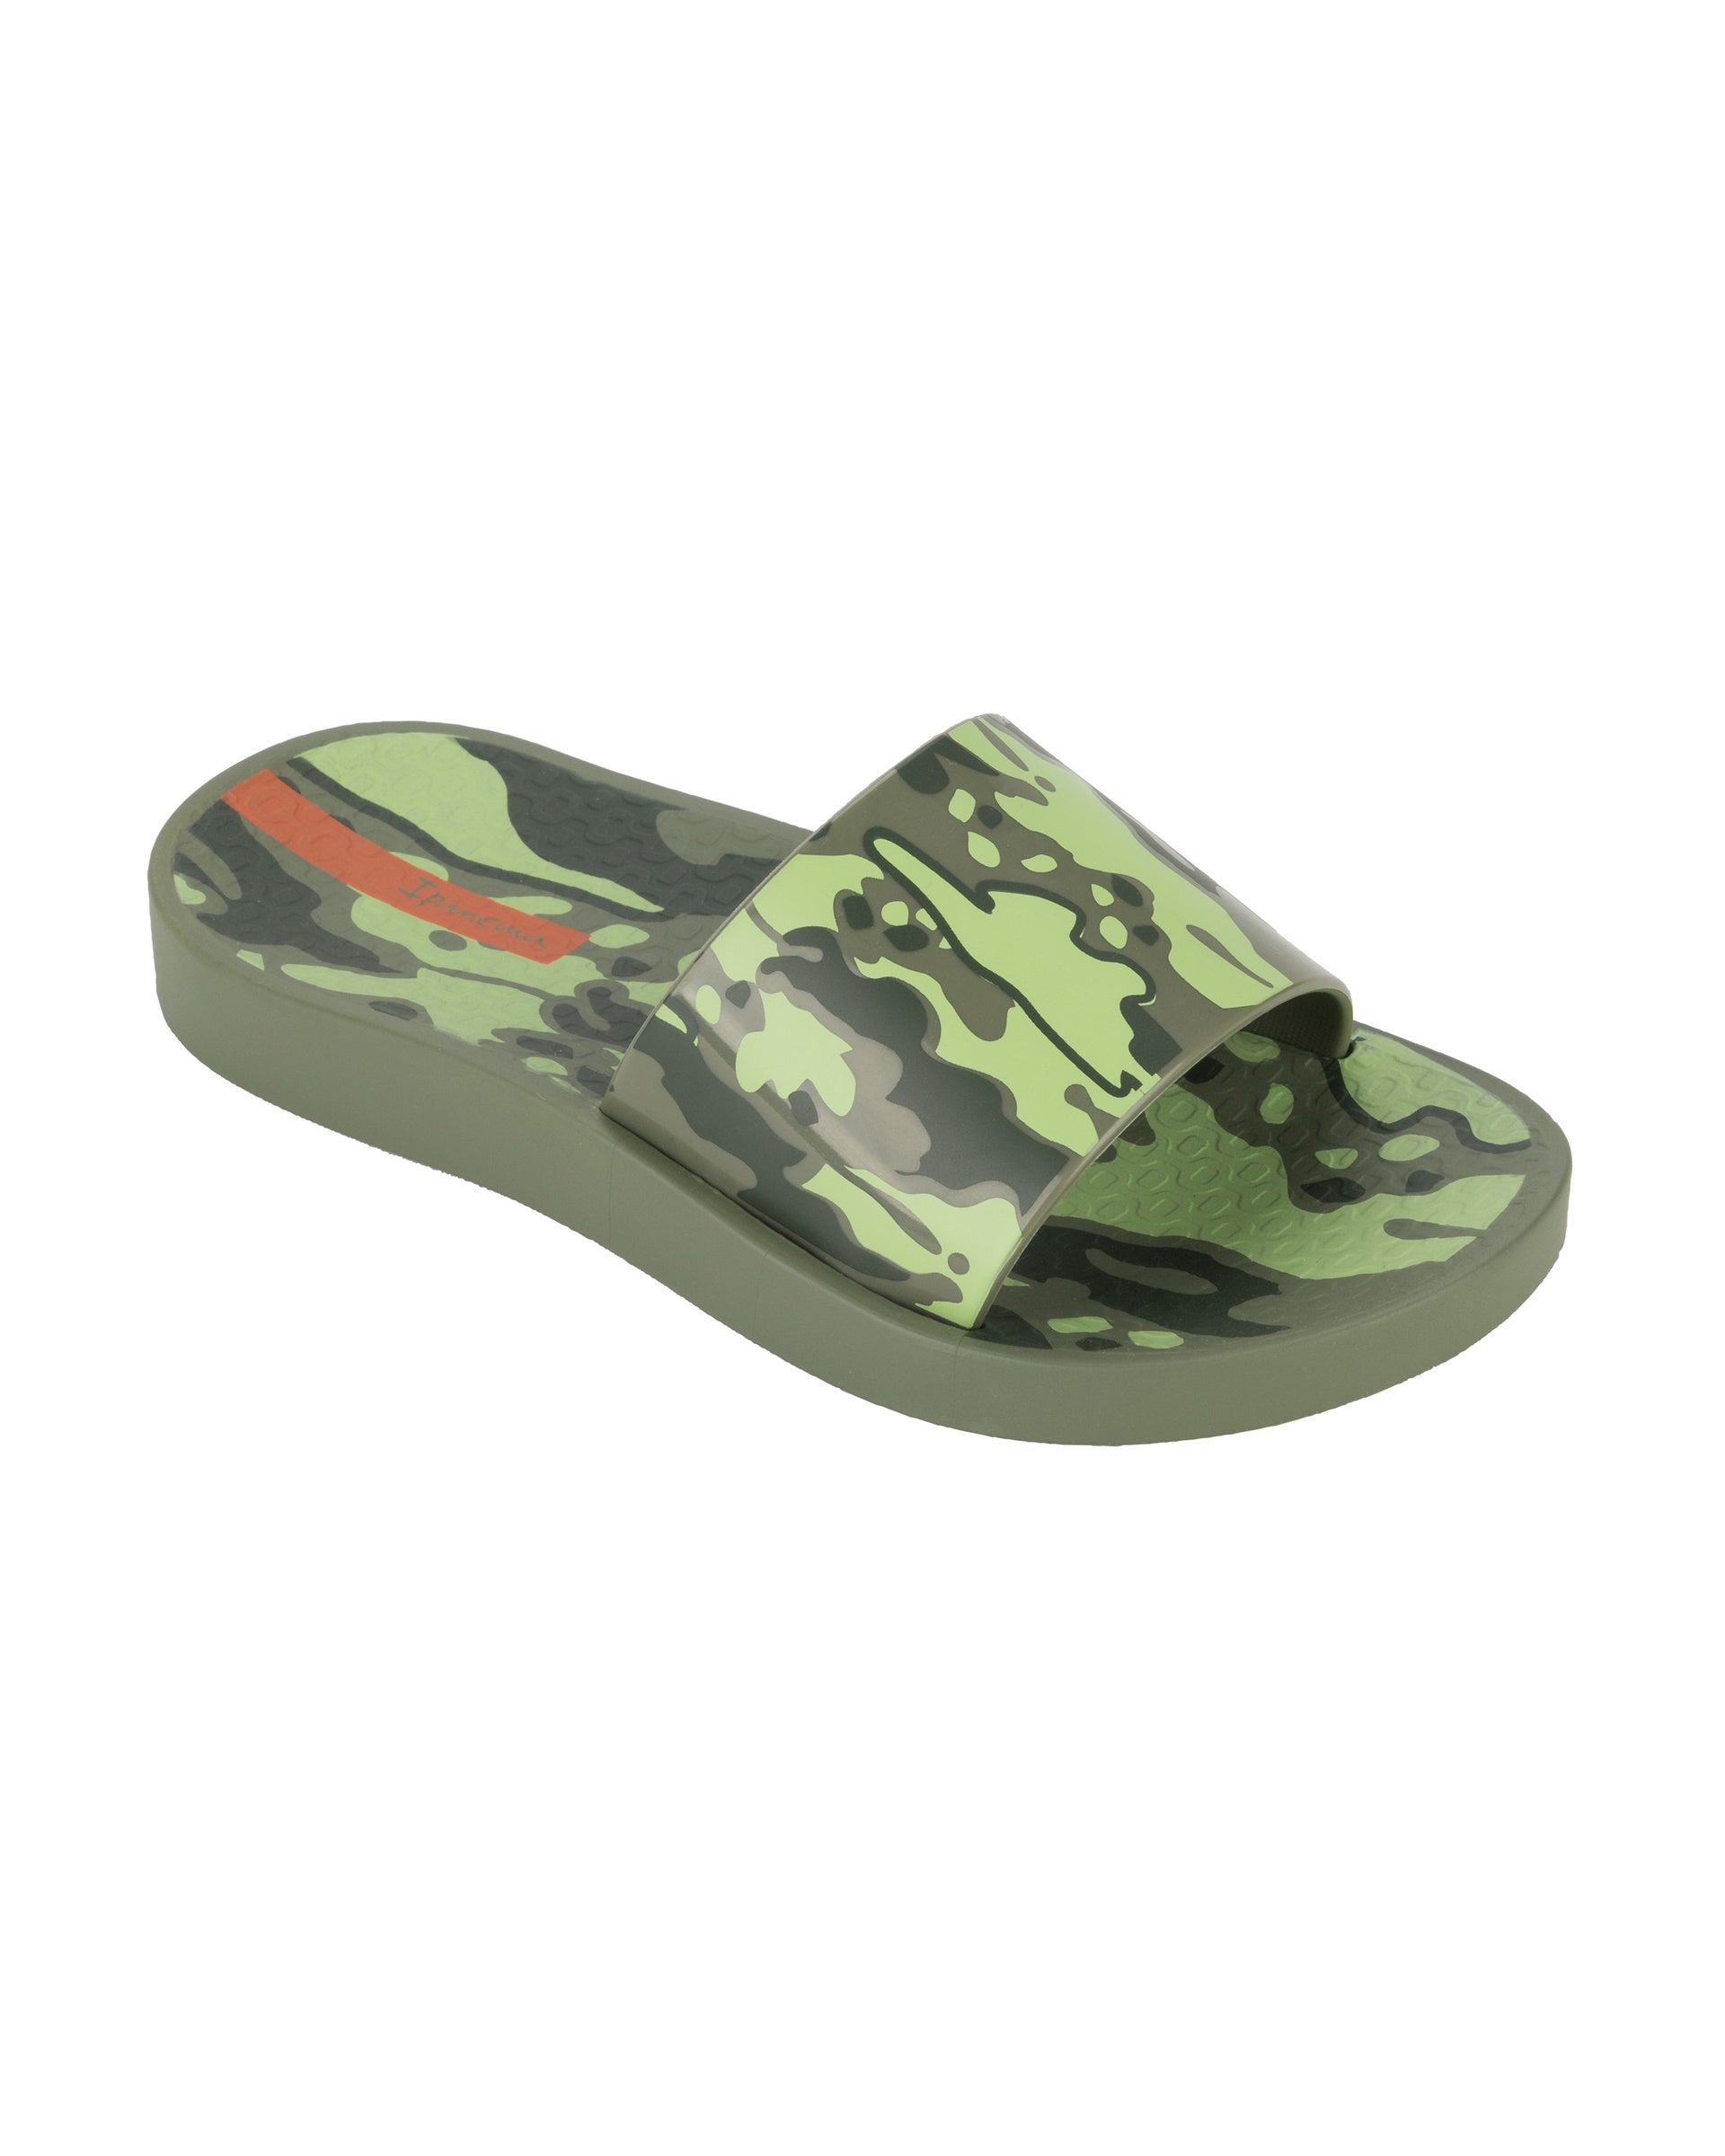 Angled view of a green Ipanema Urban kids slide with a camo print on the upper.